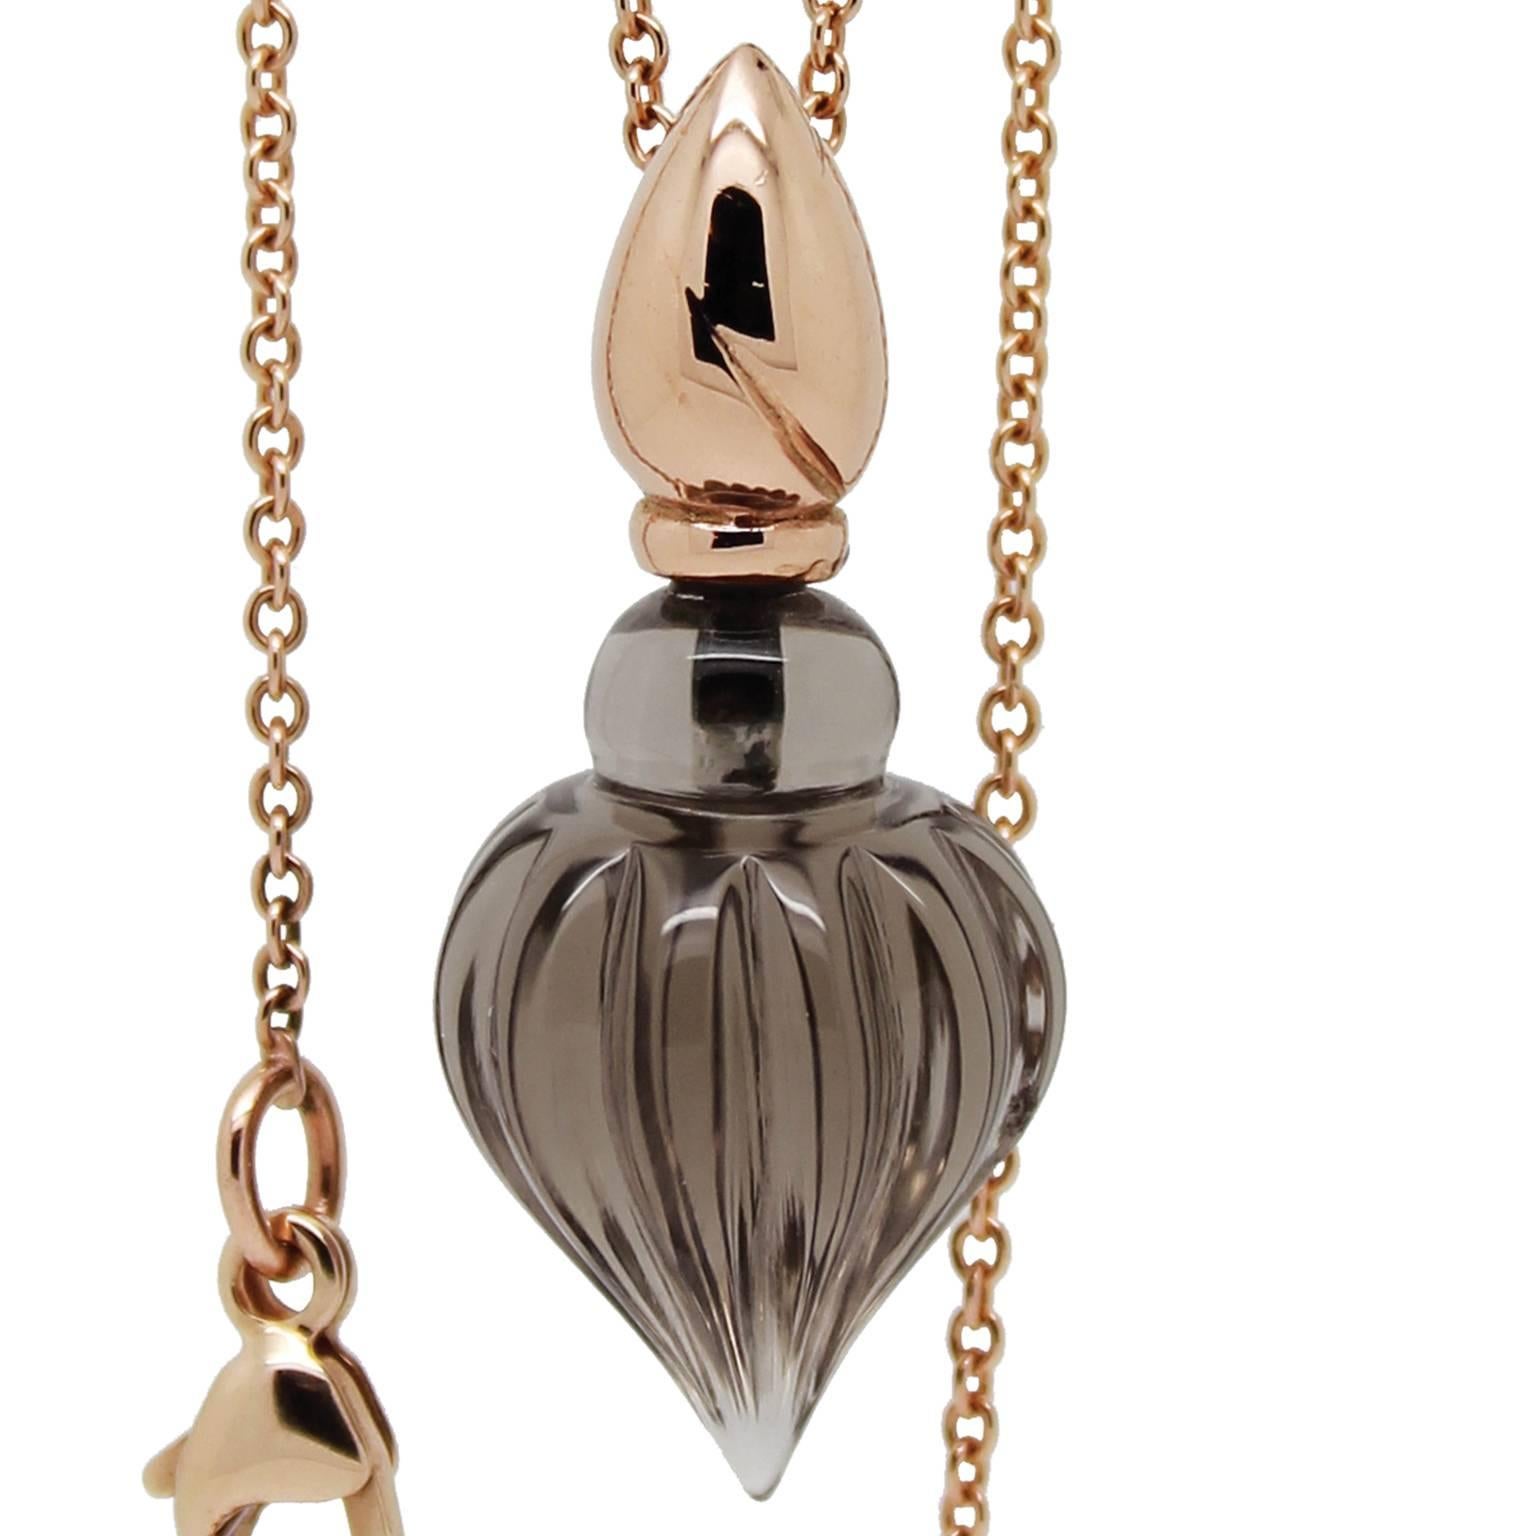 Hand carved Smoky Quartz perfume bottle styled pendant with 9k Rose Gold lid and 9k Rose Gold chain. Chain length 70cm (28 inches), adjustable to 45cm (18 inches). Stone measurements 18mm height (28mm including lid) x 12mm width. William Cheshire